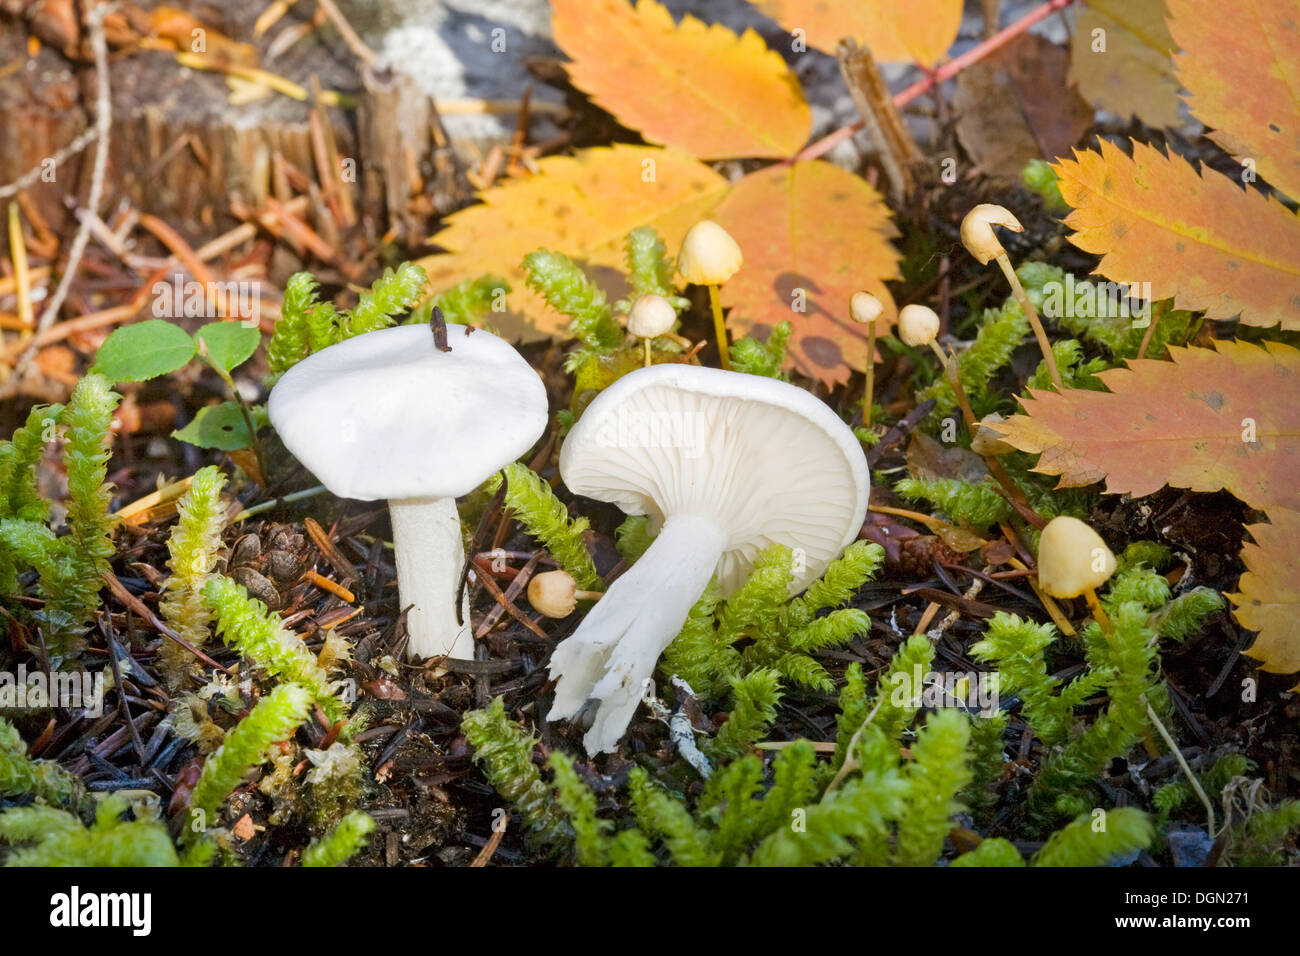 hygrophorus piceae, a snow white mushroom from the Pacific Northwest Stock Photo